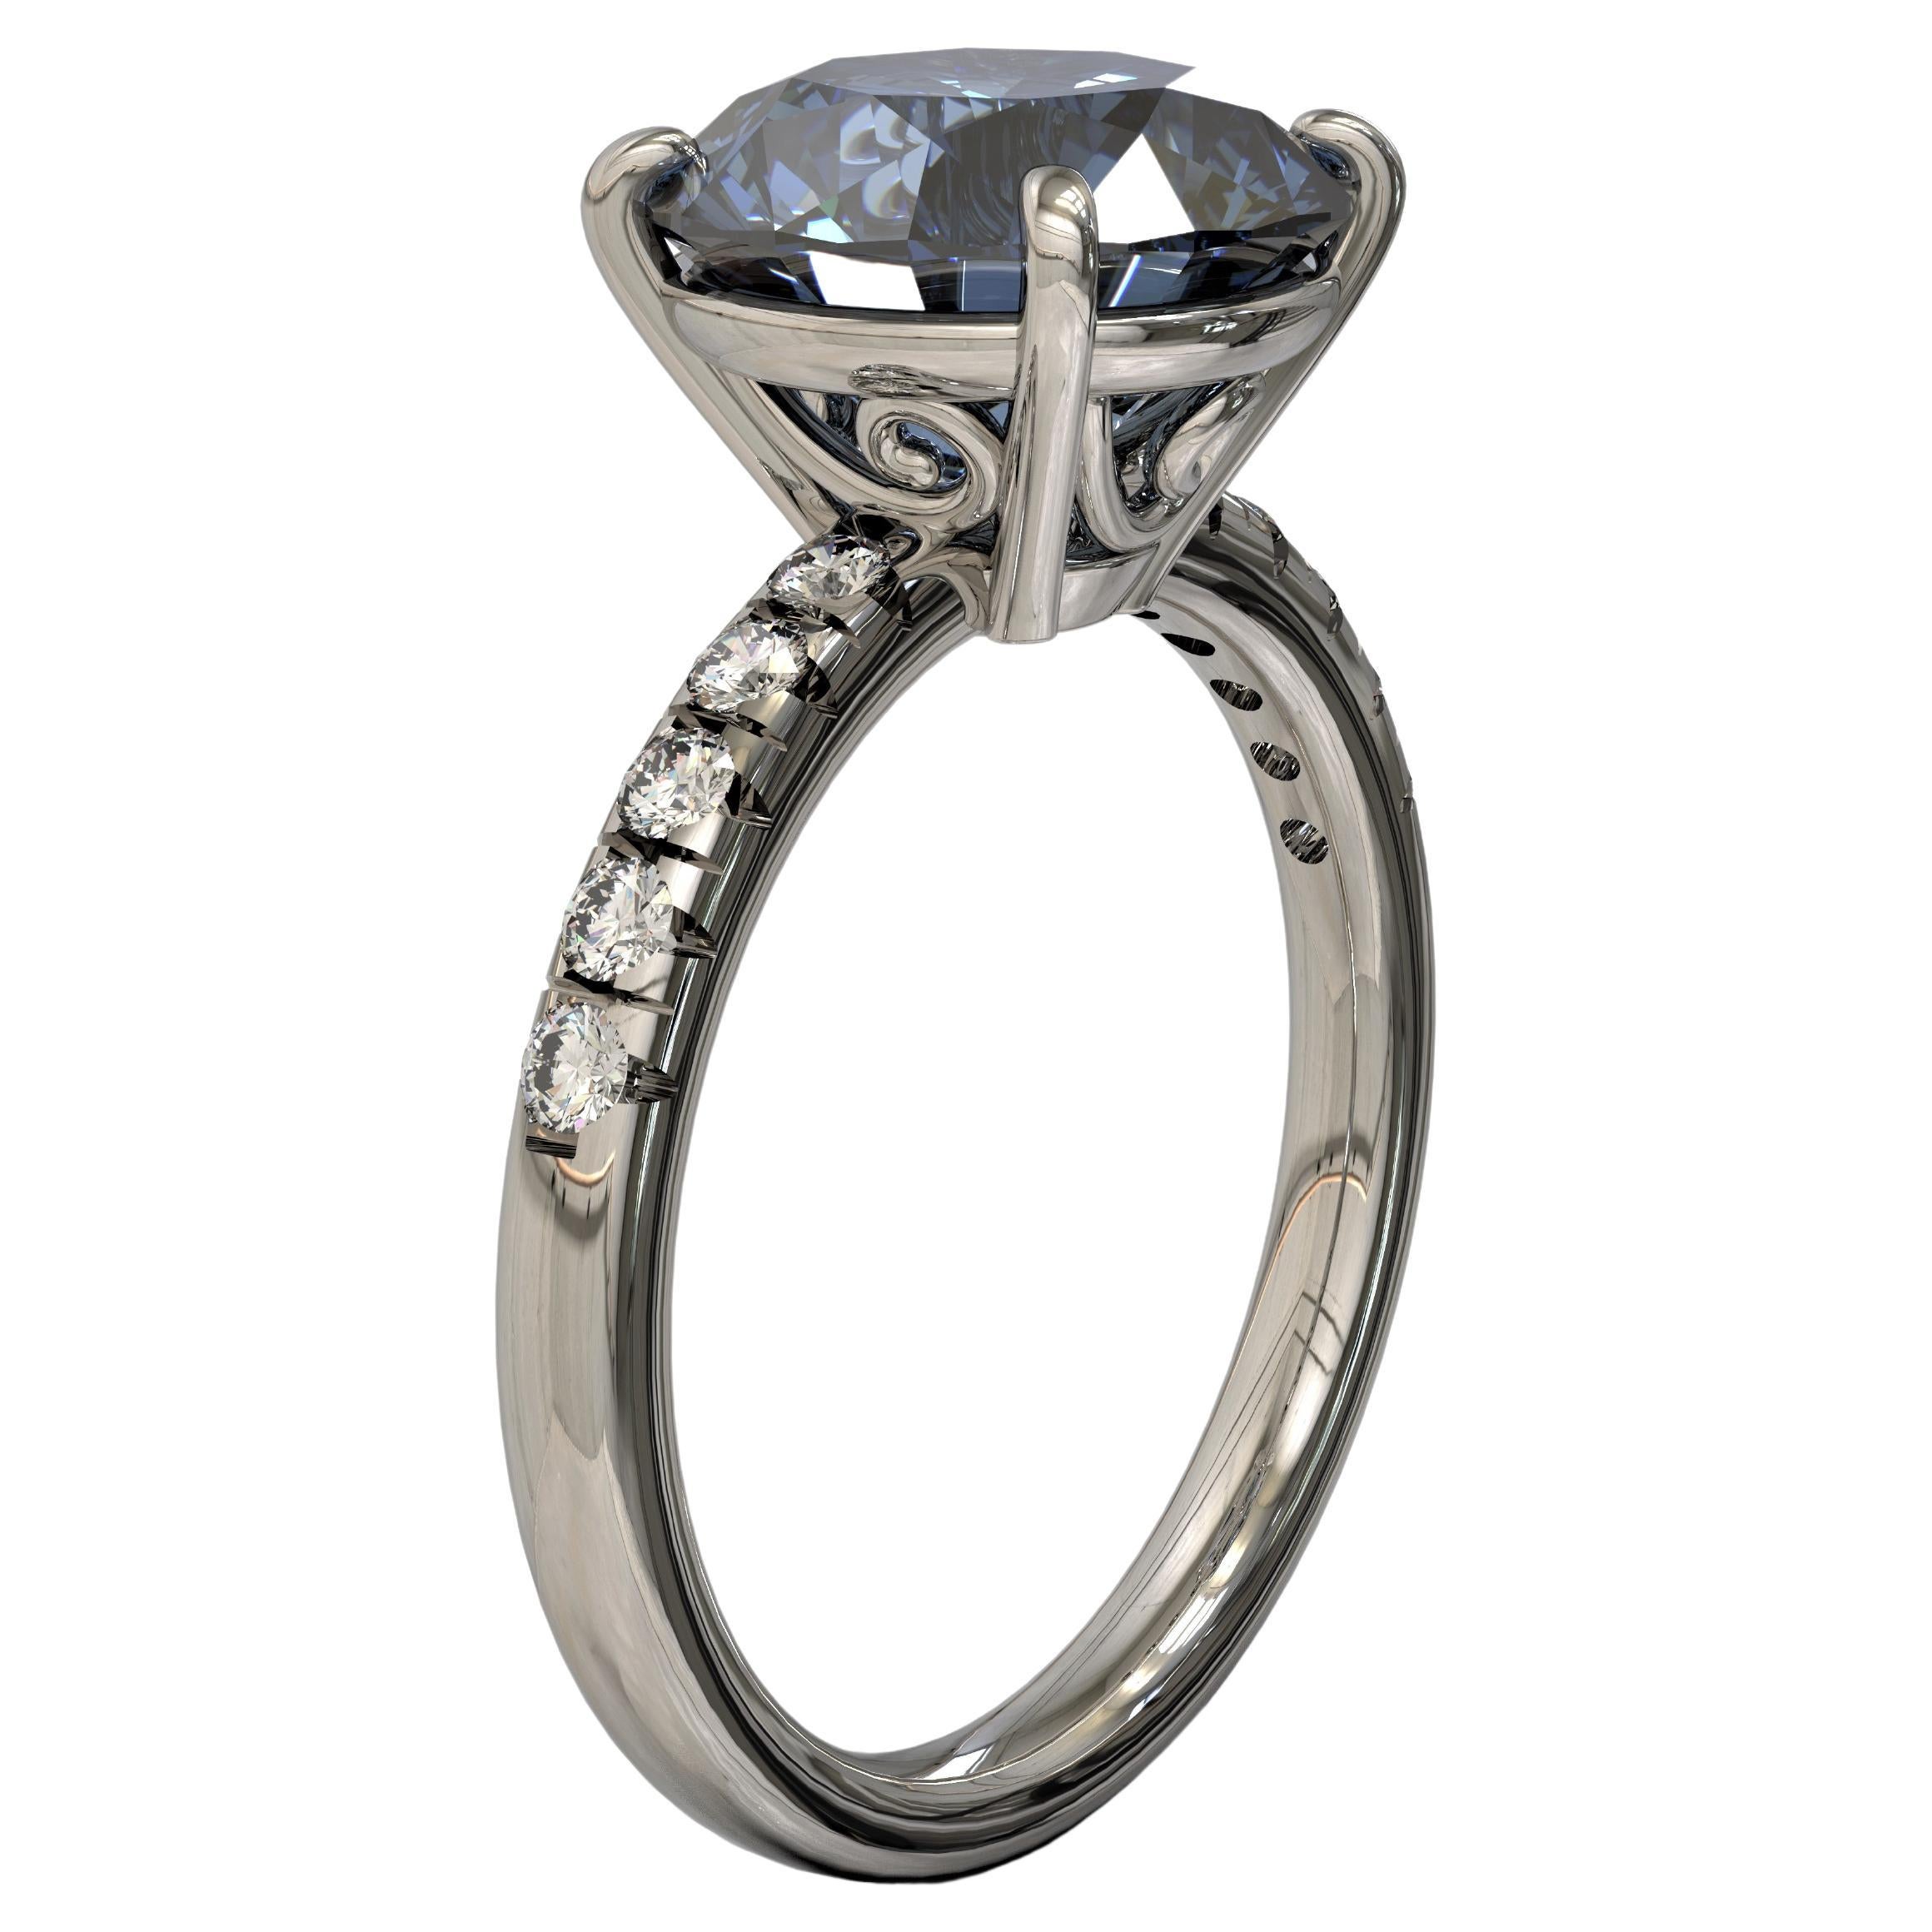 
Oceania Ring

Simply charming! This platinum ring is set with a beautiful Natural Topaz which has petite finest white diamonds on either side.

Round faceted Topaz: Intense ocean blue color, 3.81ct

Round brilliant cut diamonds: F colour, VS